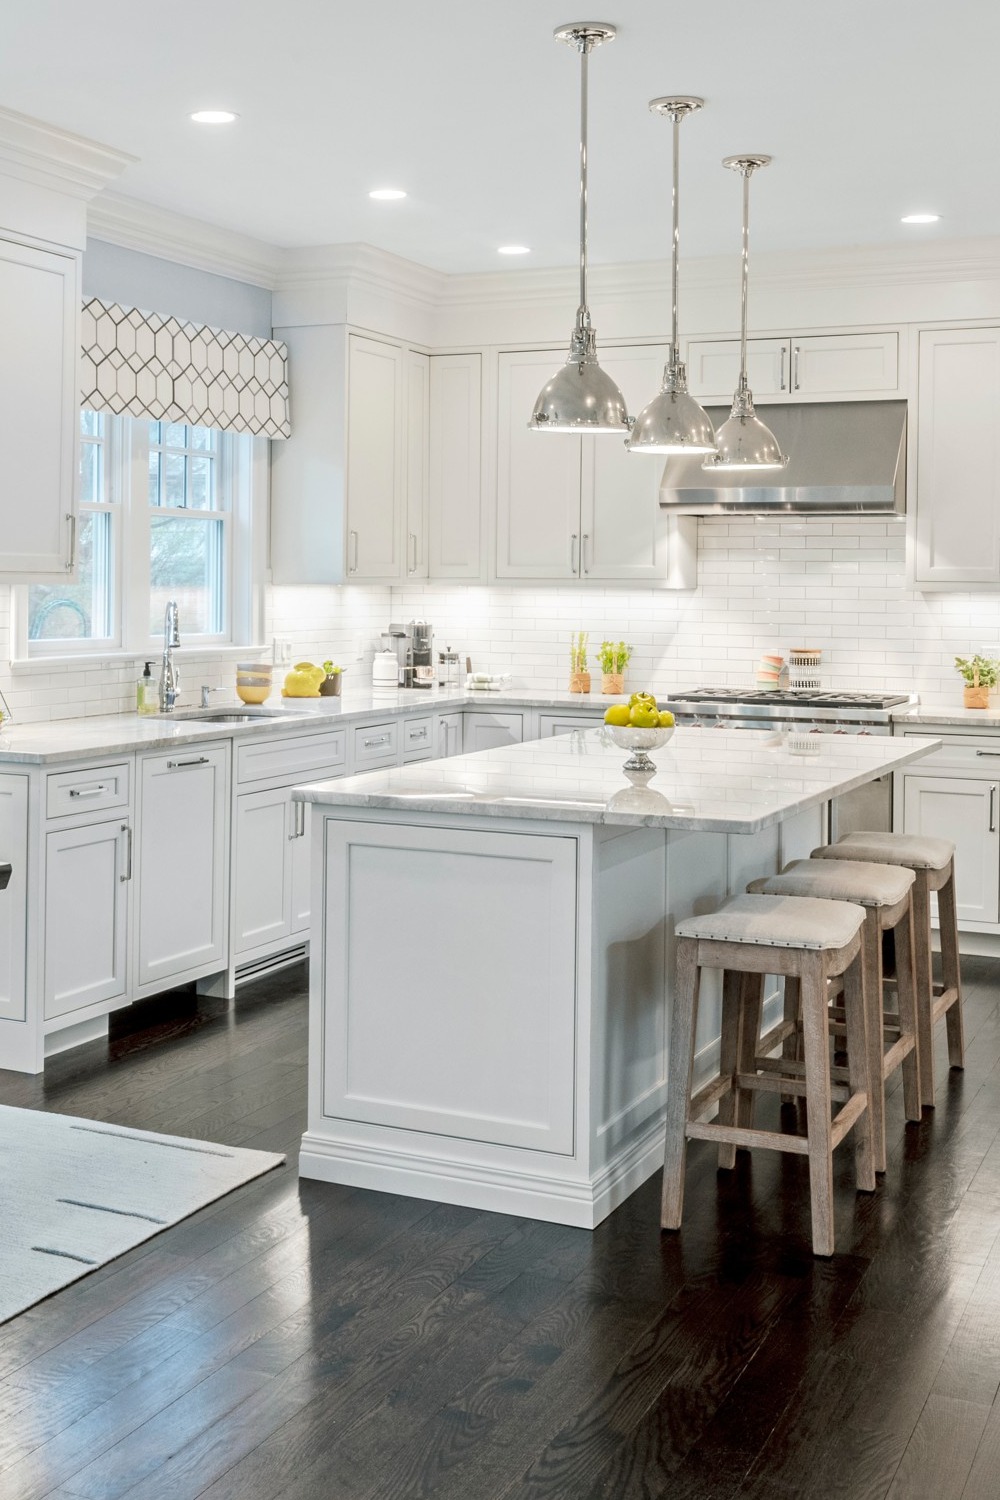 Marble Countertops Stainless Steel Countertops Laminate Countertops With White Cabinet Gray